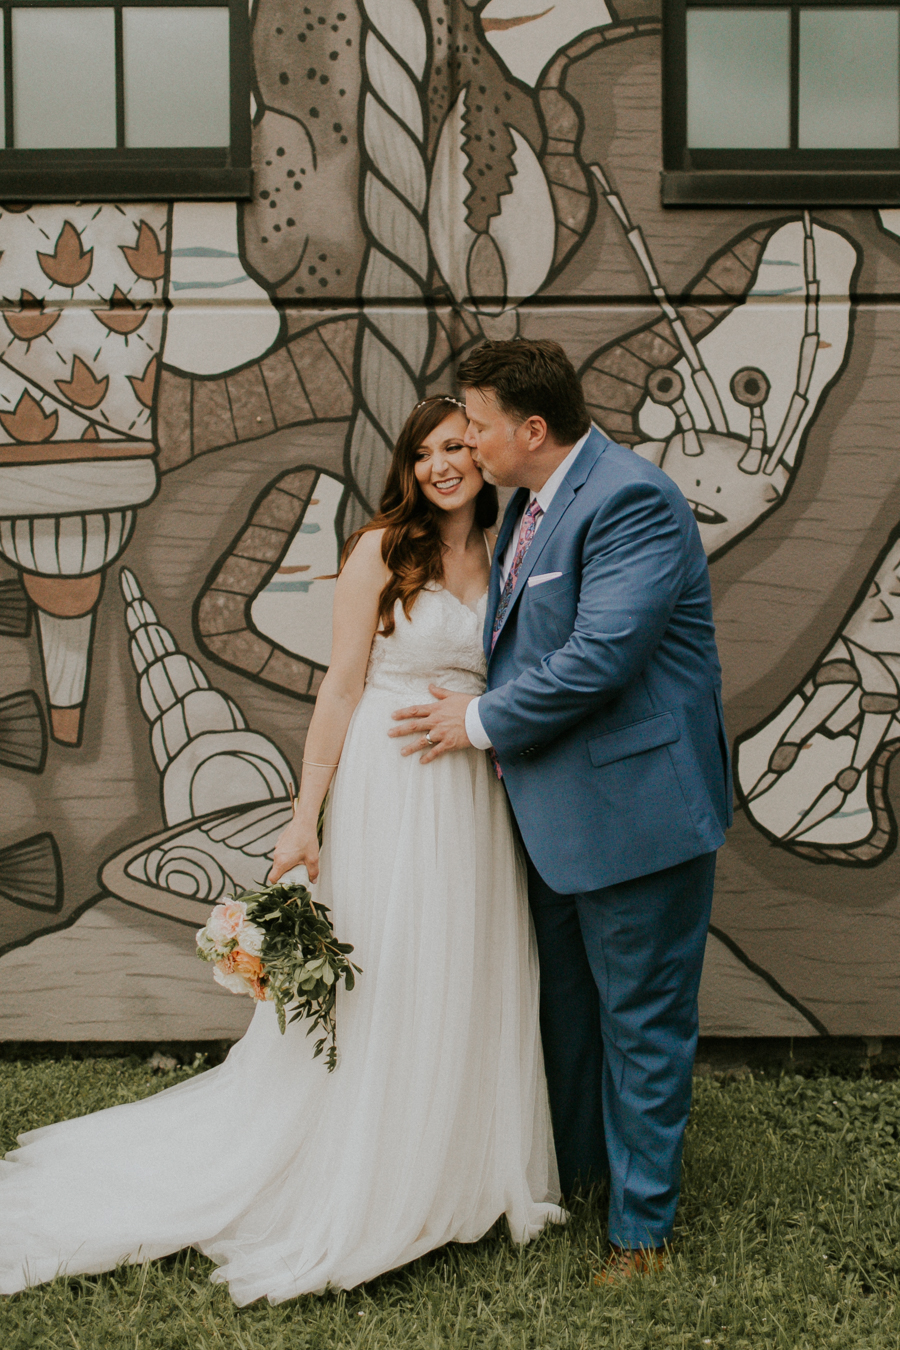 Stephanie And Kent Bailey Tampa Florida Romantic Wedding At Coppertail Brewery in Ybor Florist Fire BHLDN Mis En Place Ibex String Quartet Let Them Eat Cake -66.jpg